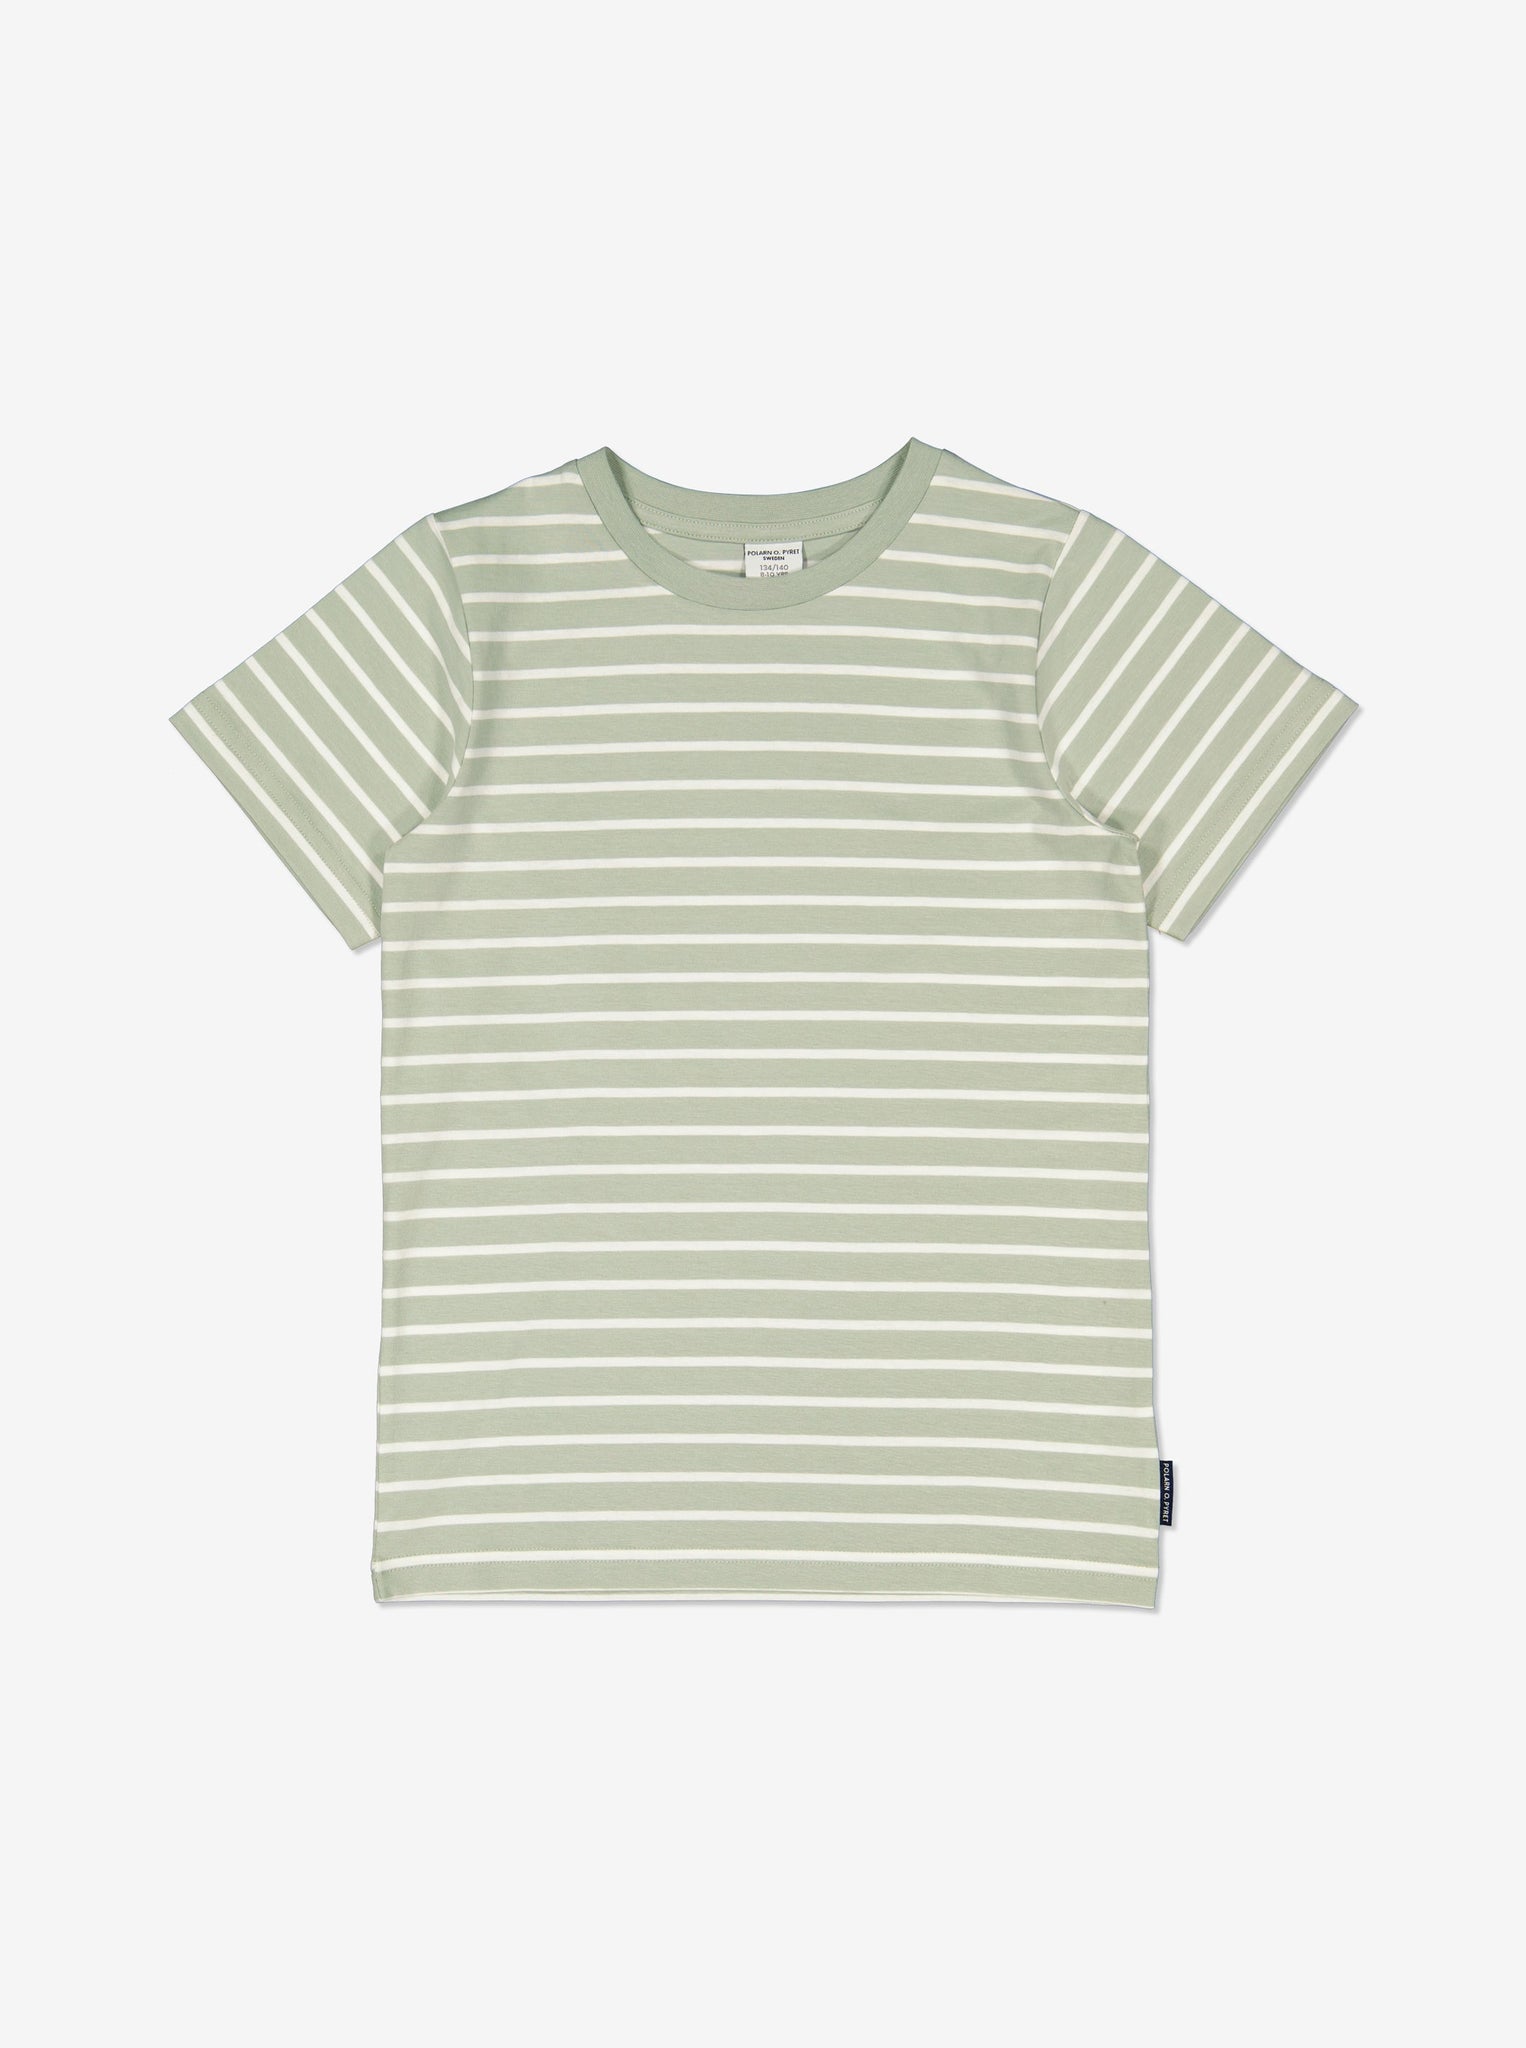  Cotton Striped Green Kids T-shirt from Polarn O. Pyret Kidswear. Made using environmentally friendly materials.